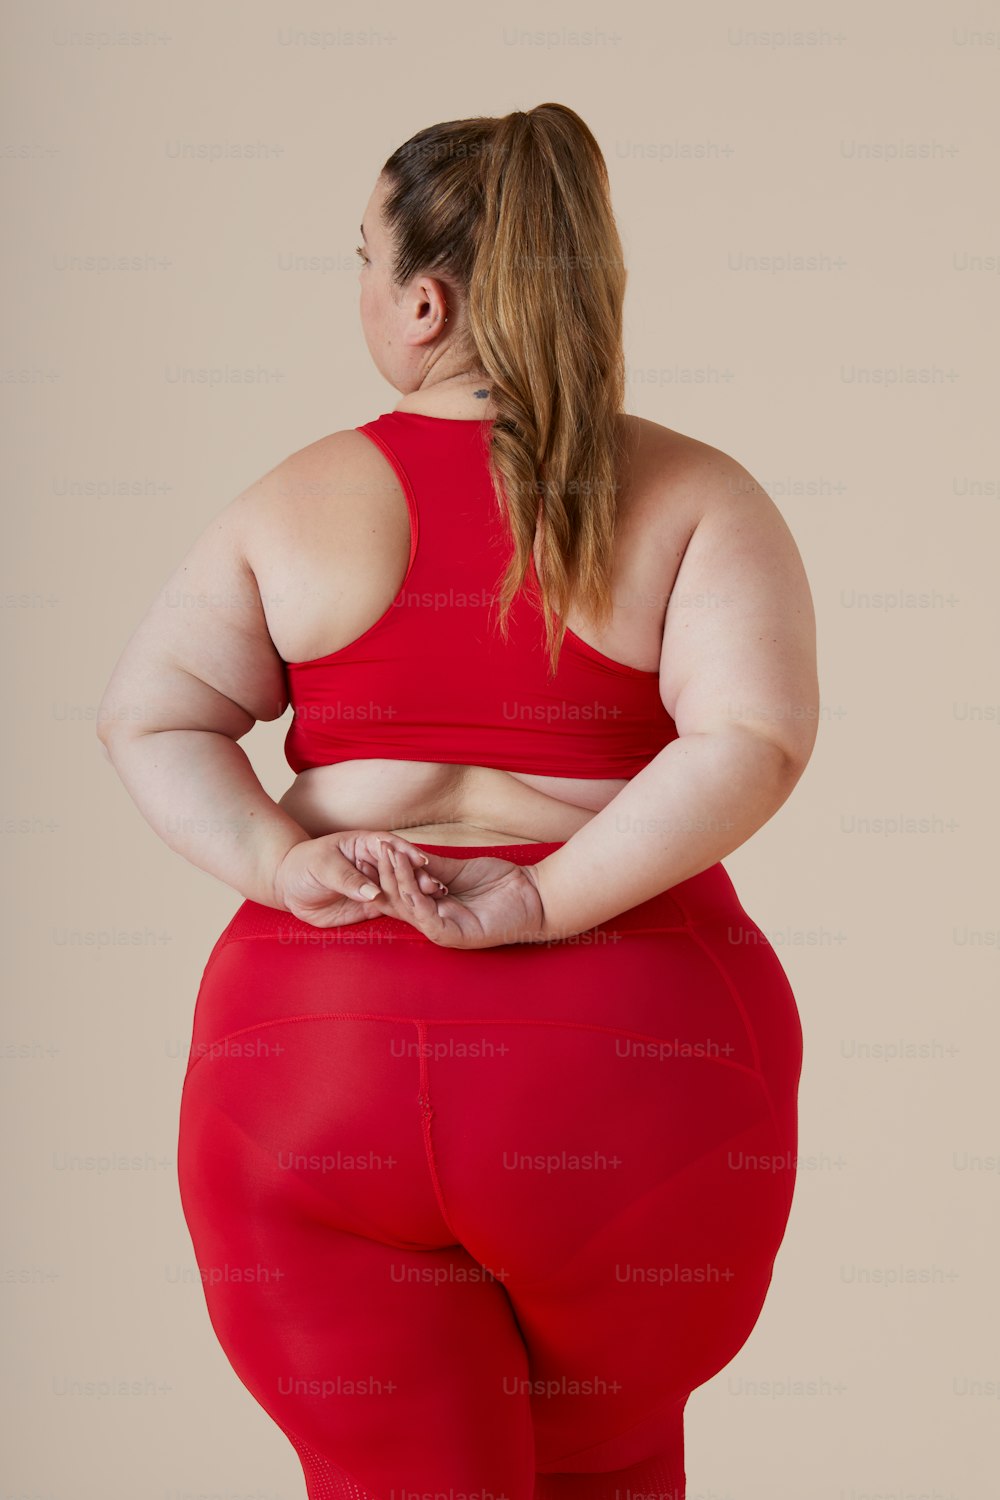 A woman in a red top and leggings photo – Spandex Image on Unsplash